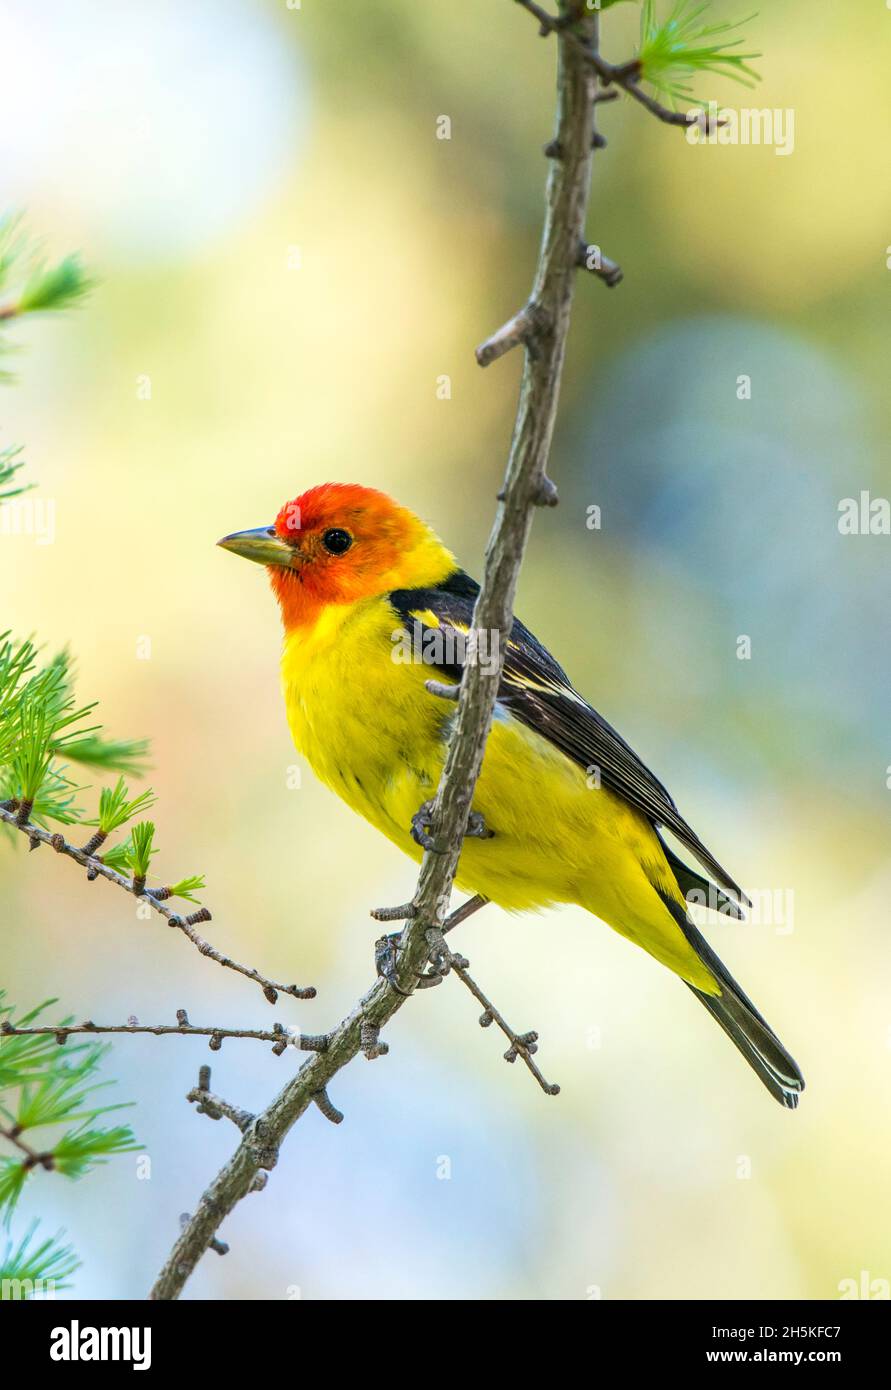 Close-up portrait of a western tanager (Piranga ludoviciana) perched on a twig; Montana, United States of America Stock Photo